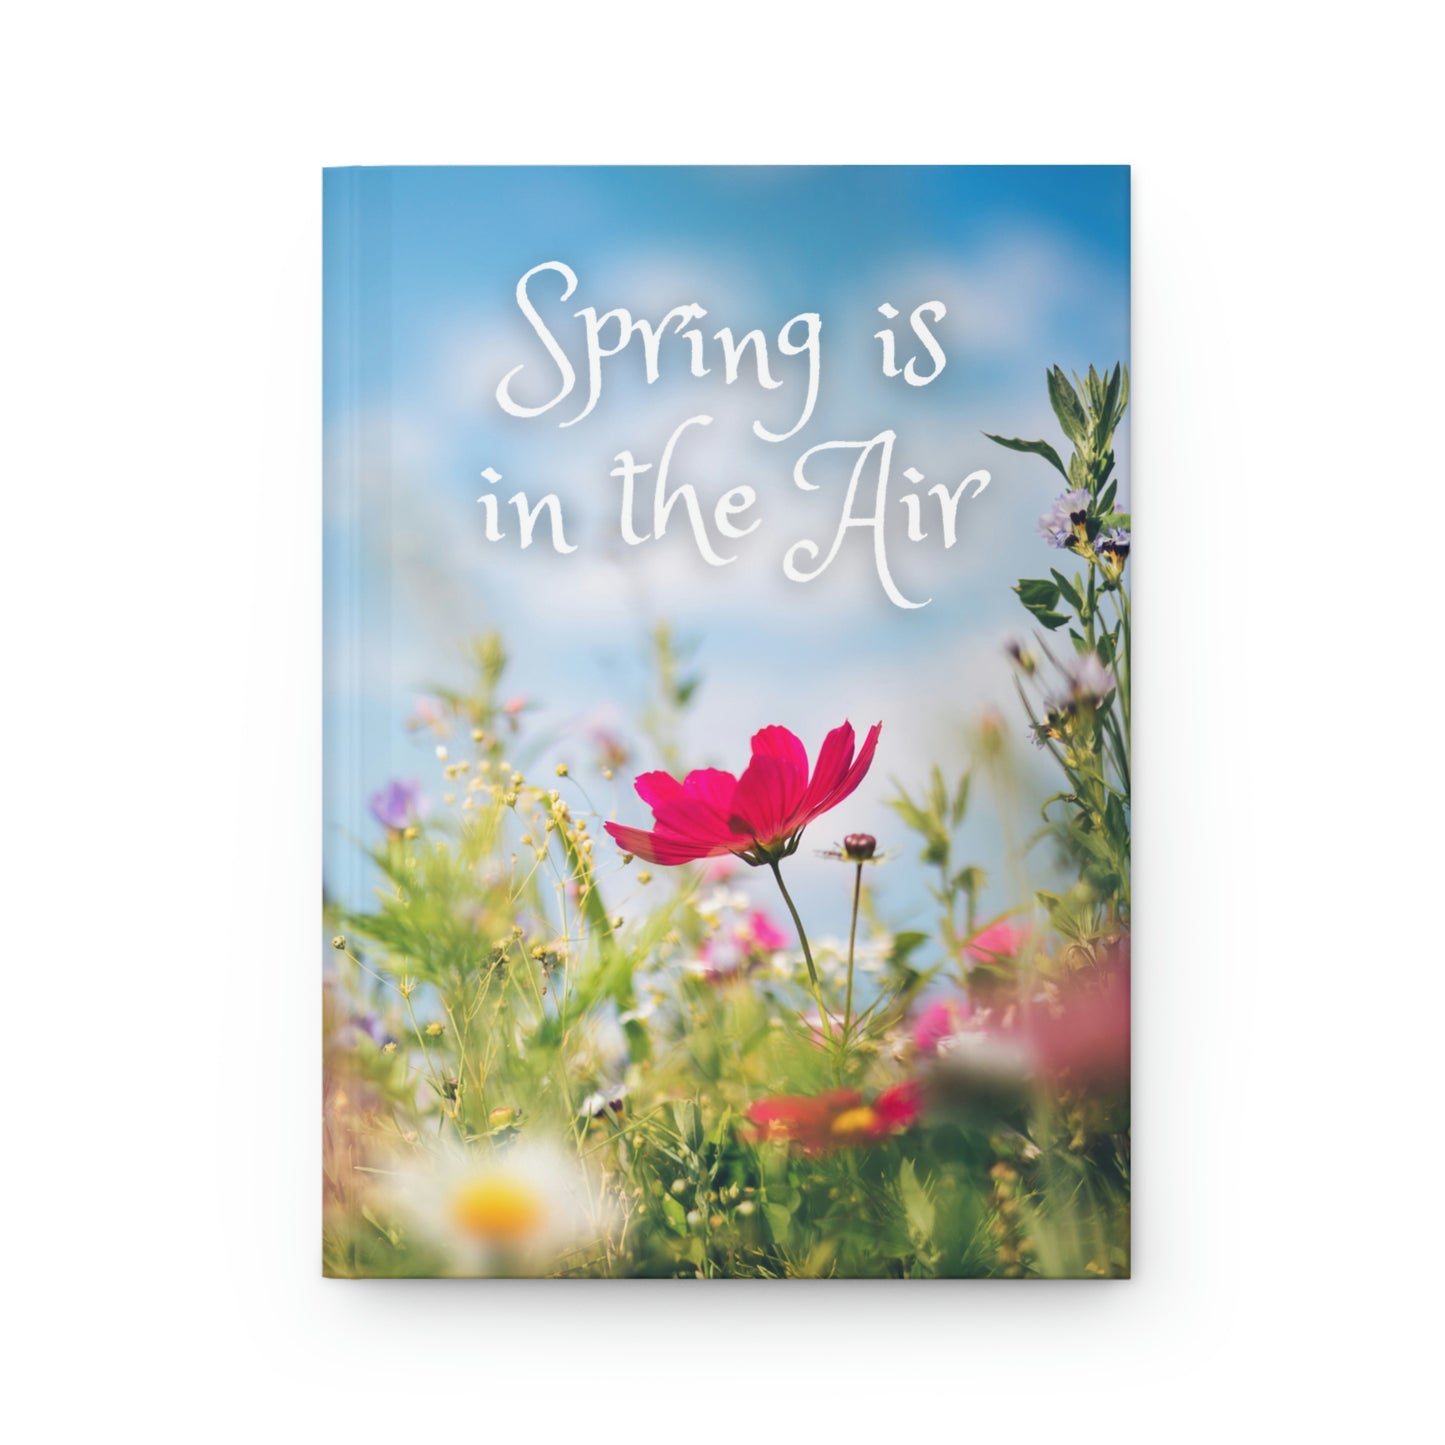 Spring is in the Air Notebook Book Hardcover Journal Matte